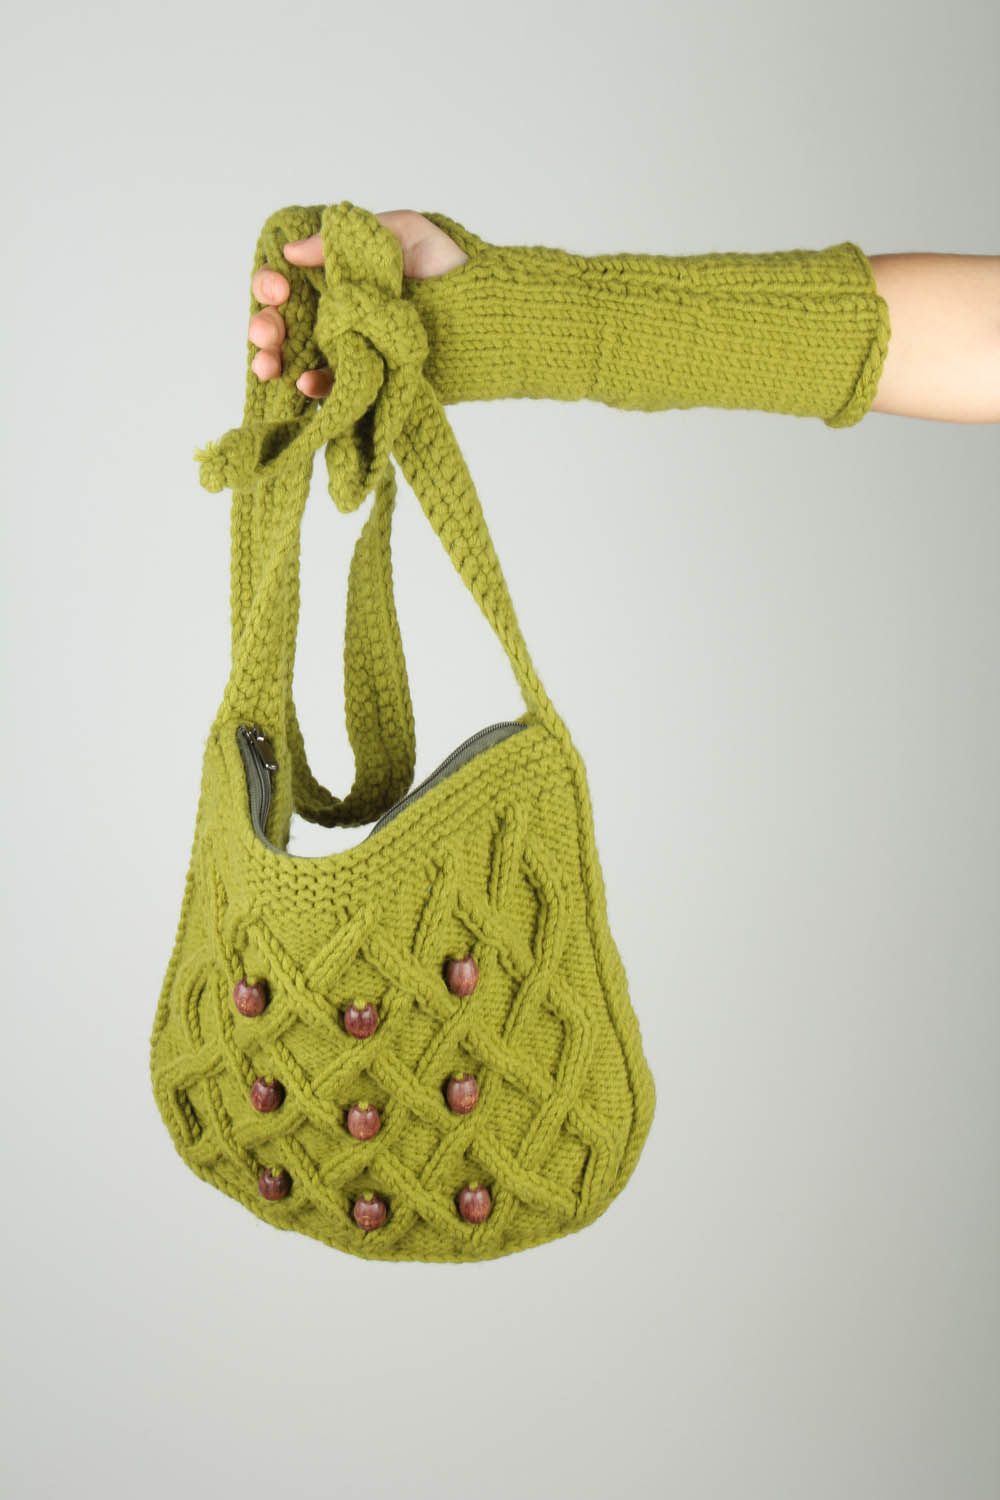 Crochet purse and mittens photo 2